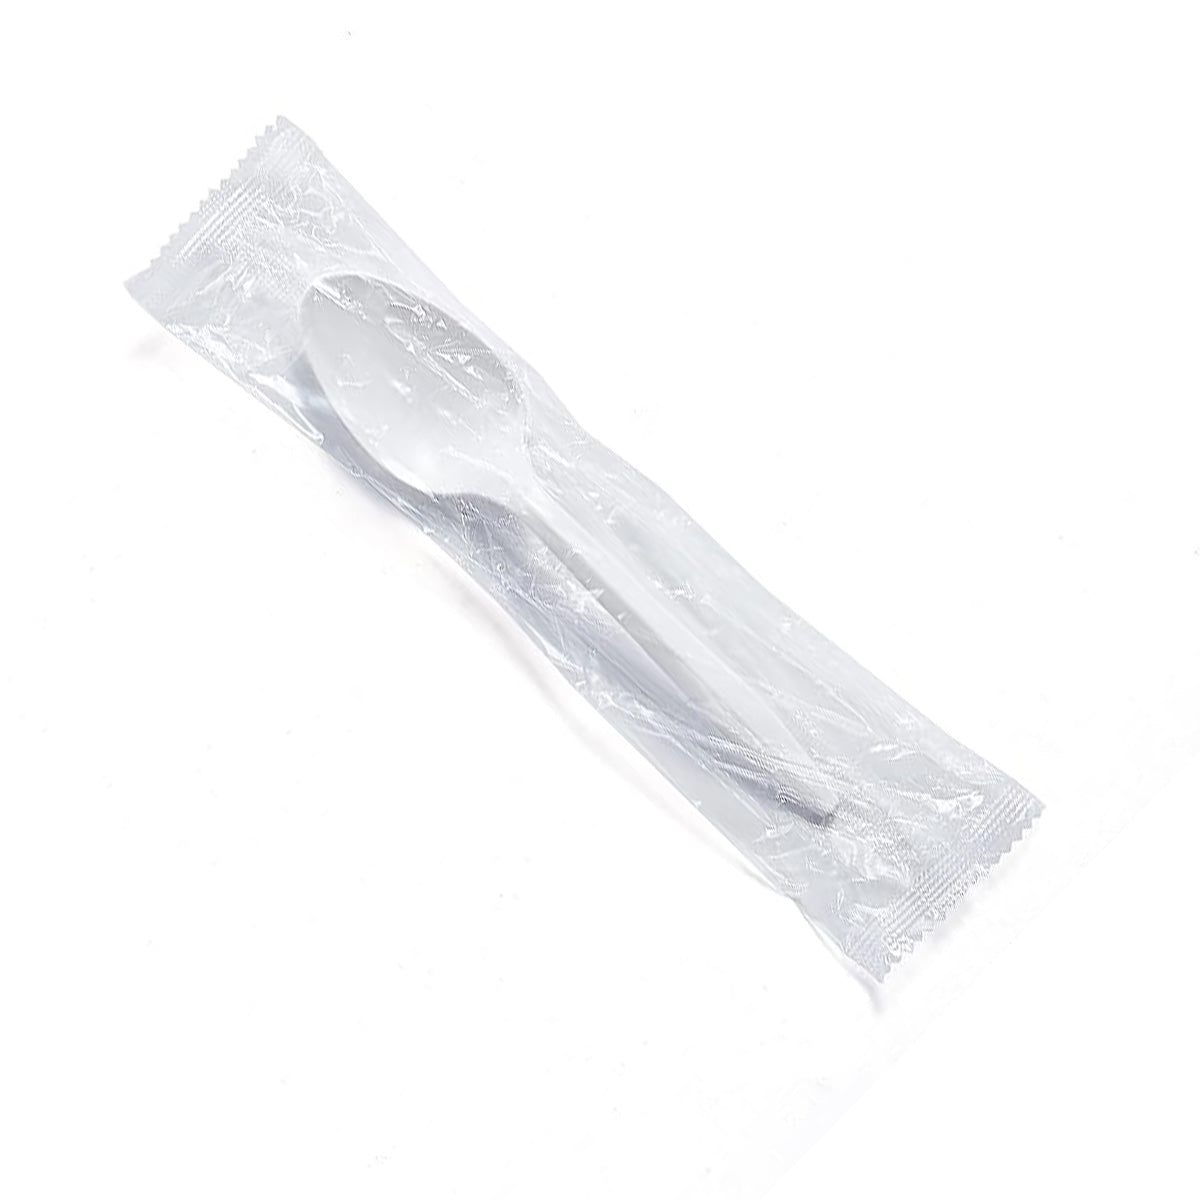 CIAO! Medium Weight Disposable White Teaspoons Polypropylene Individually Wrapped (Case of 1,000)